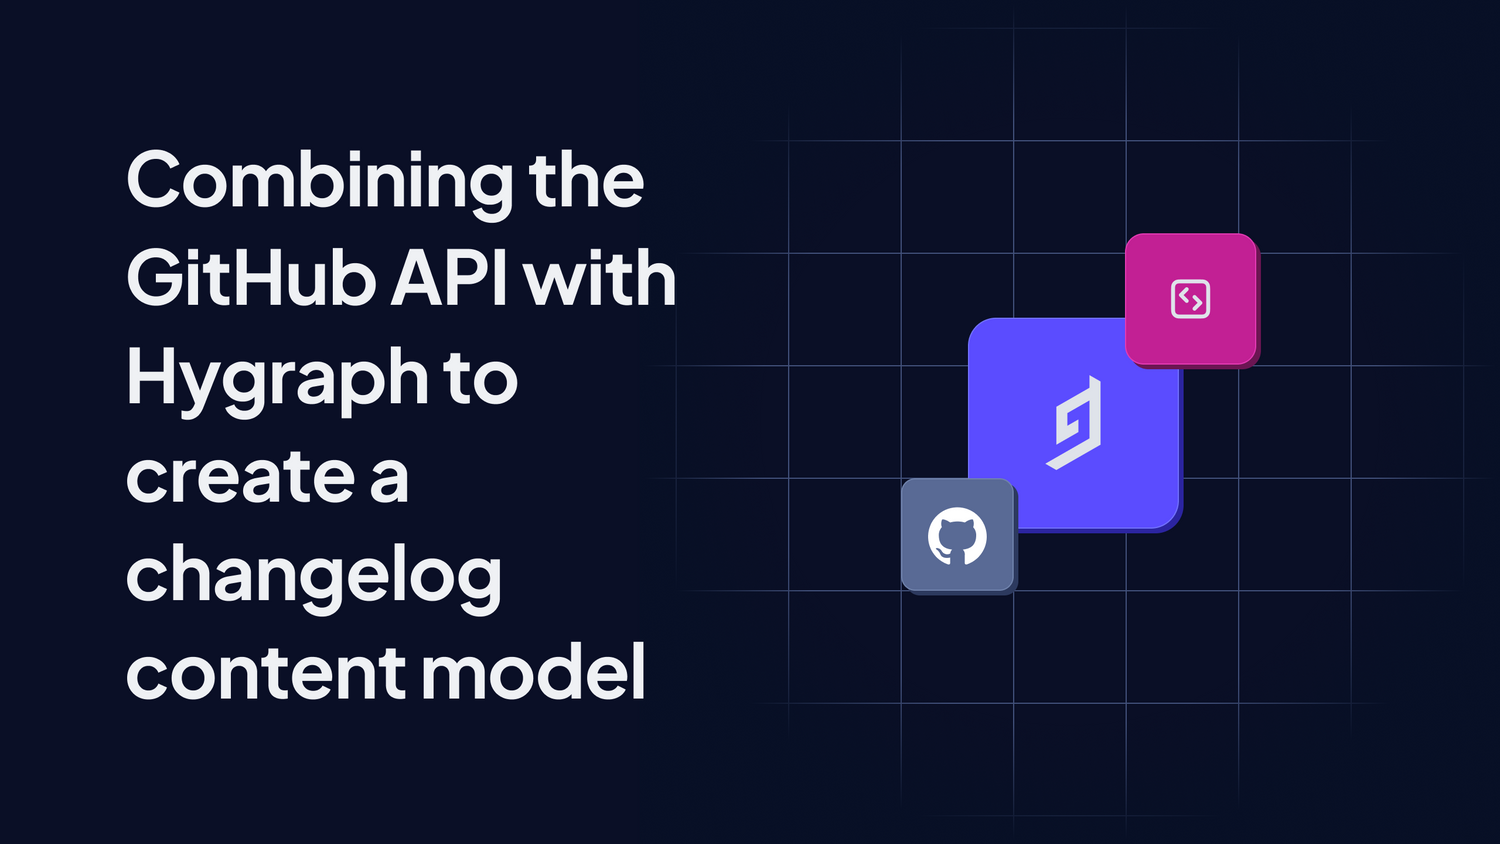 Combining the GitHub API with Hygraph to create a changelog content model